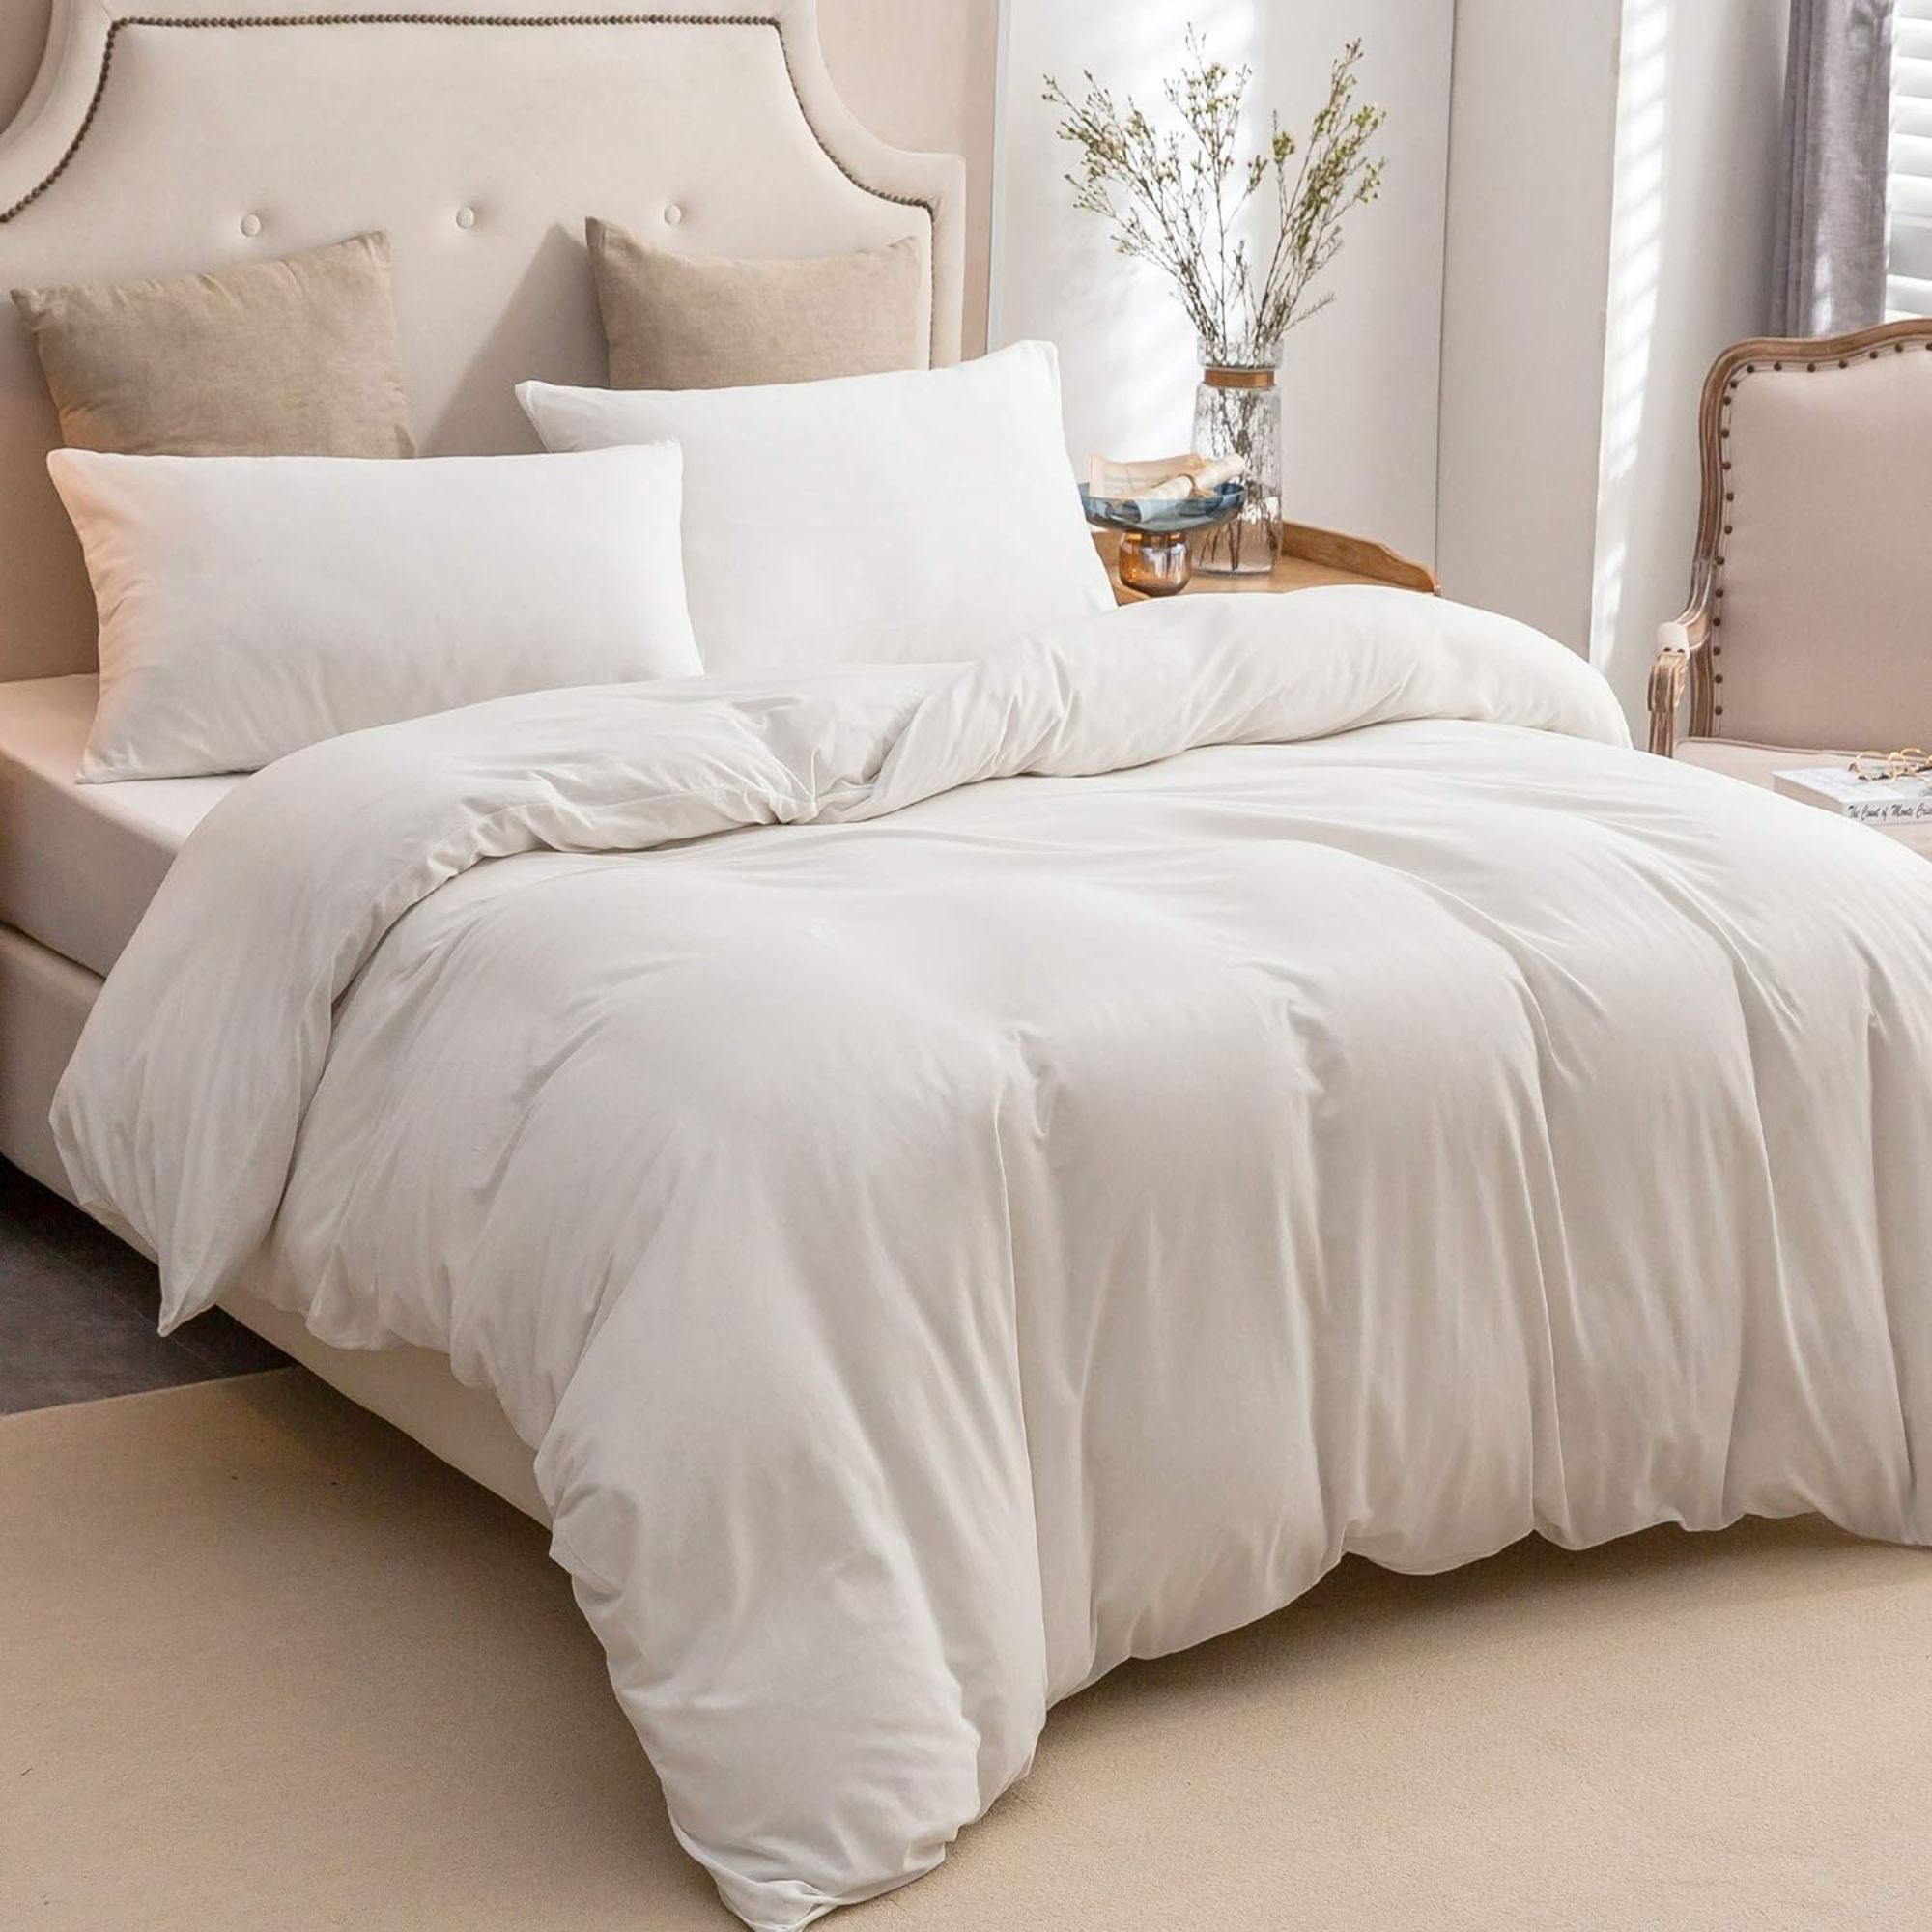 Pure Era Jersey Knit Duvet Cover on a bed.